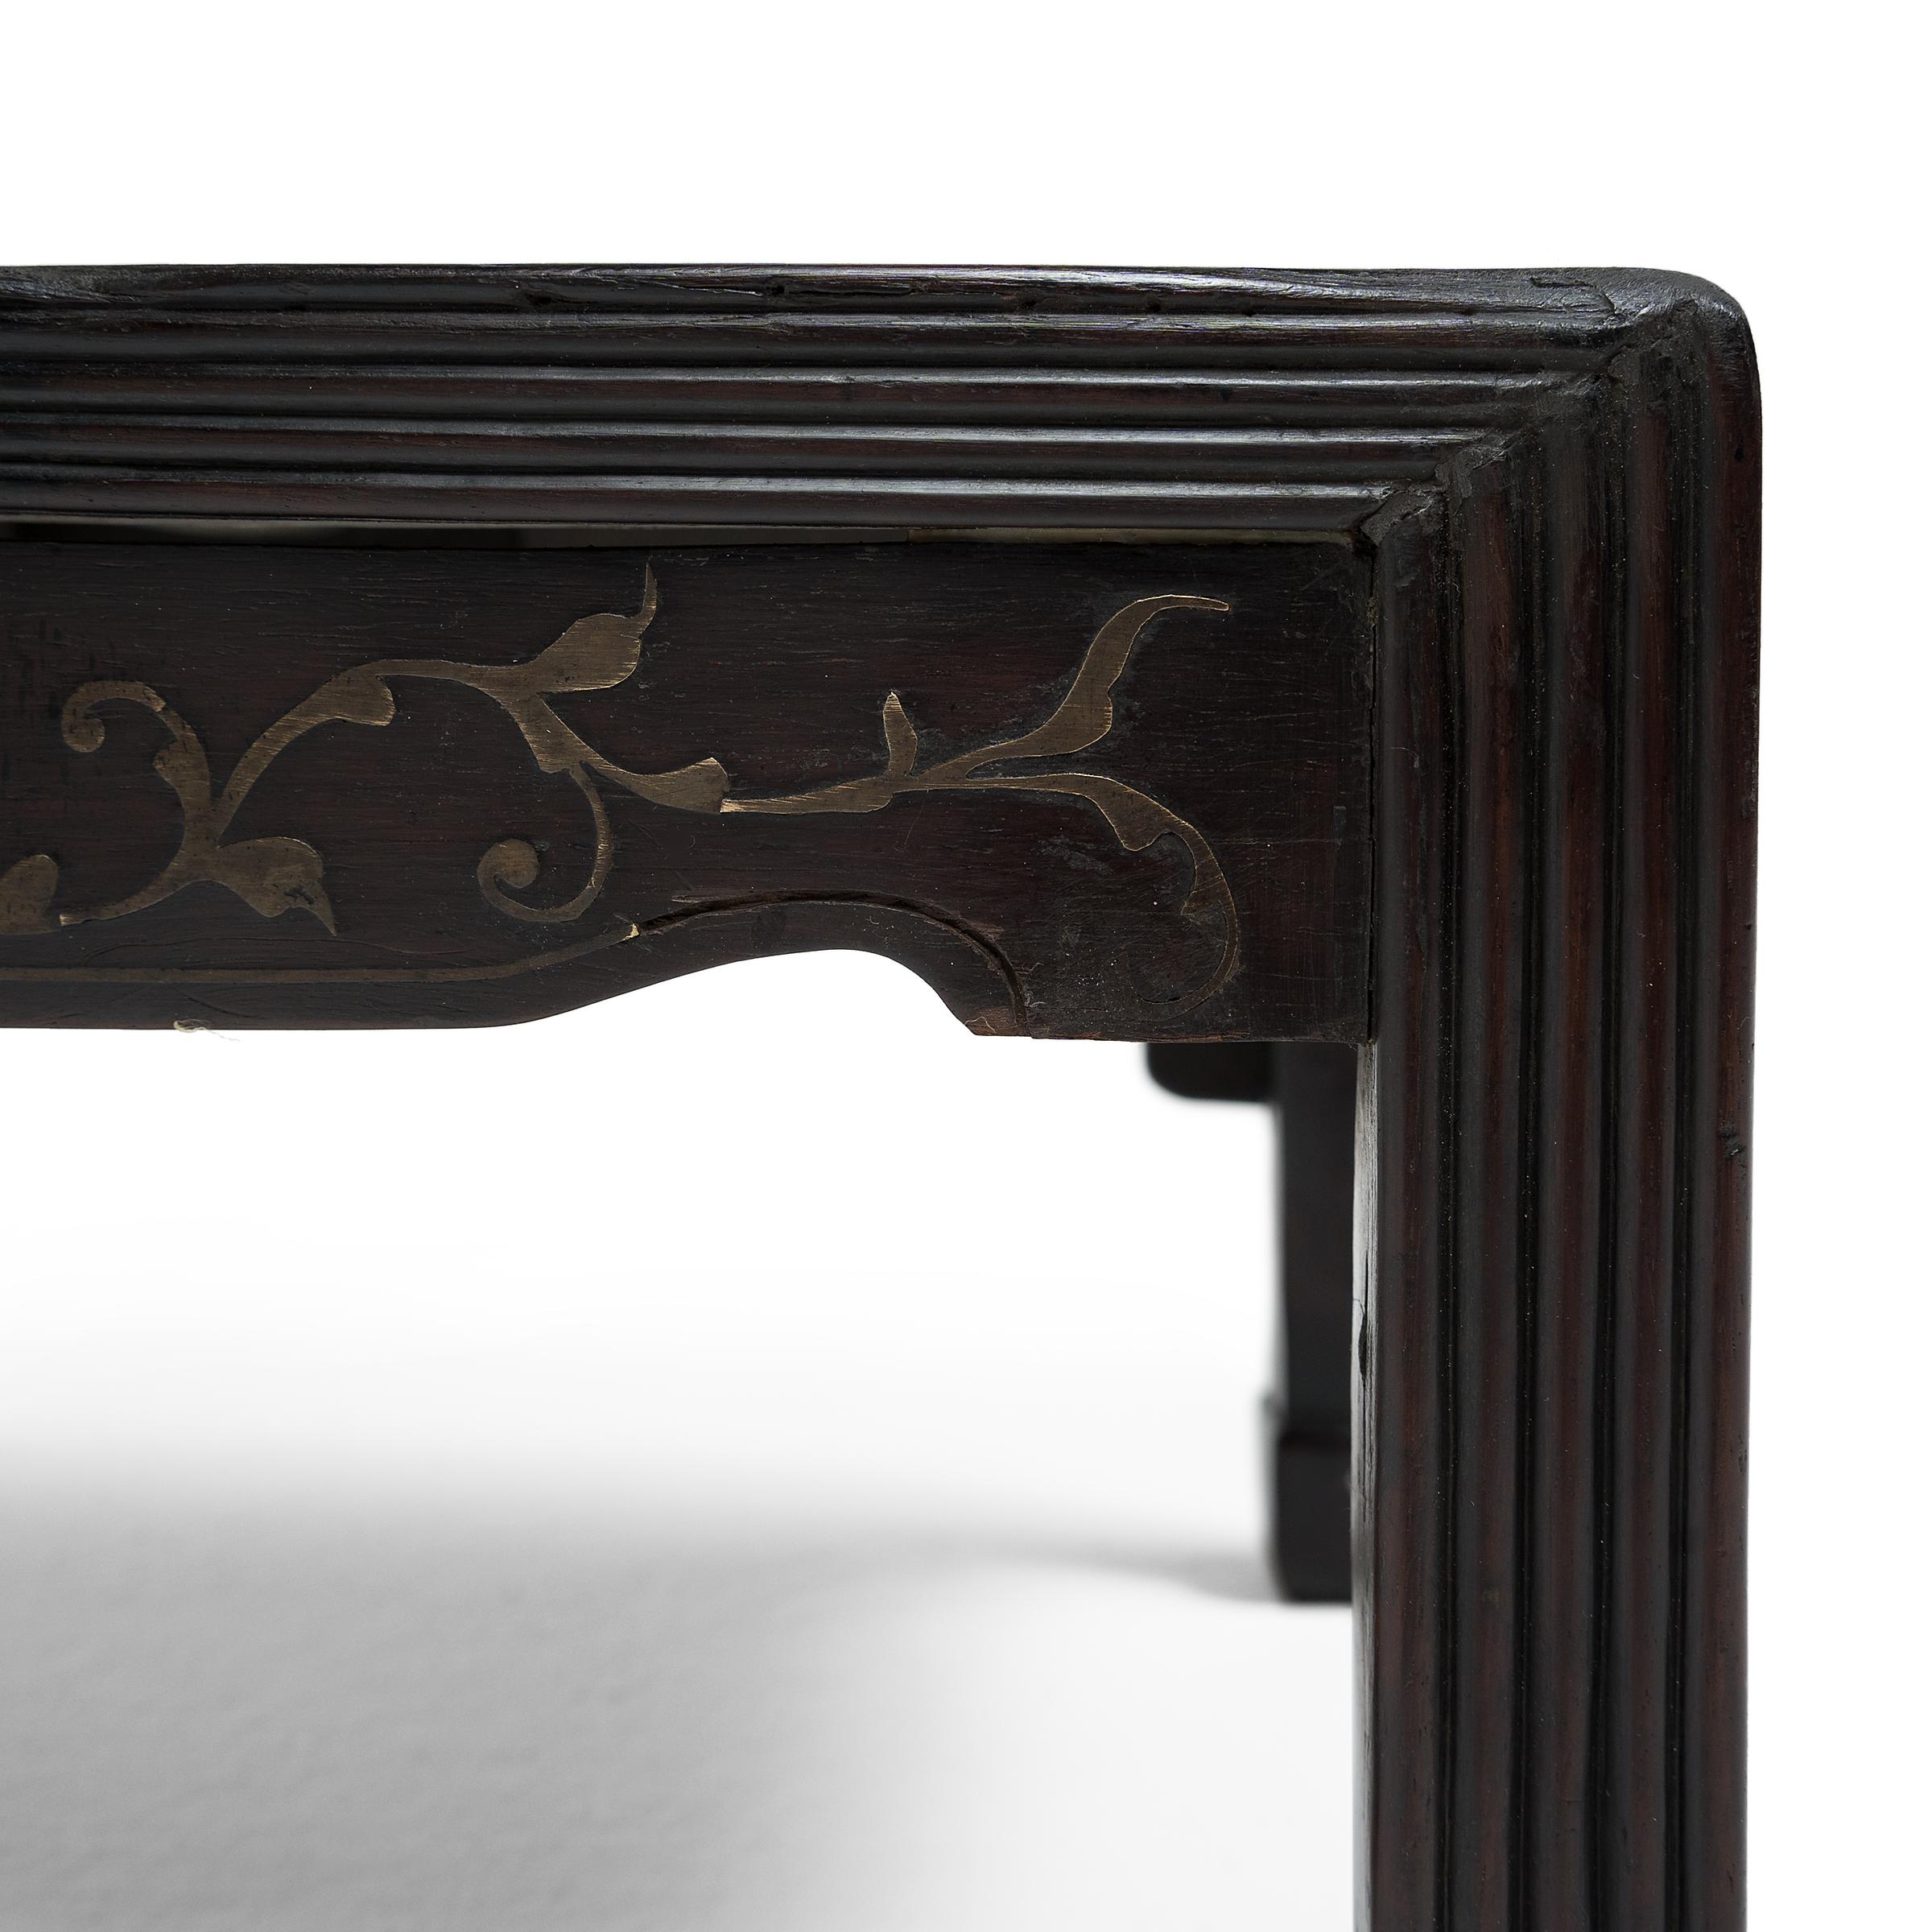 Carved Chinese Kang Table with Ridged Legs, c. 1800